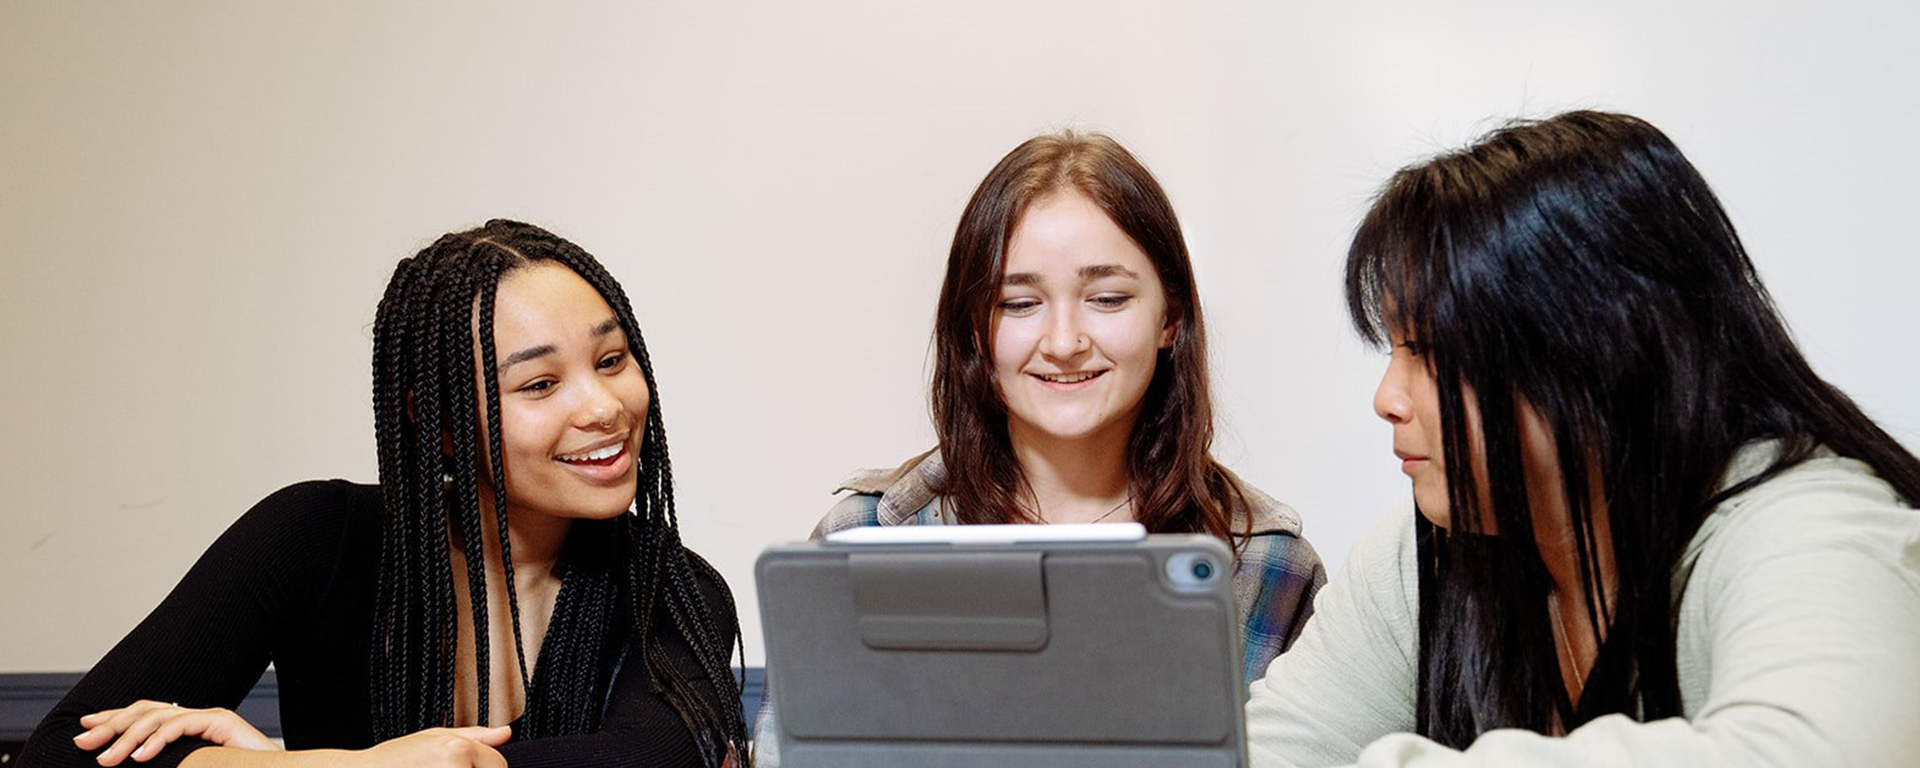 Three female English undergraduate students from different ethnic backgrounds look at a laptop together in a classroom.